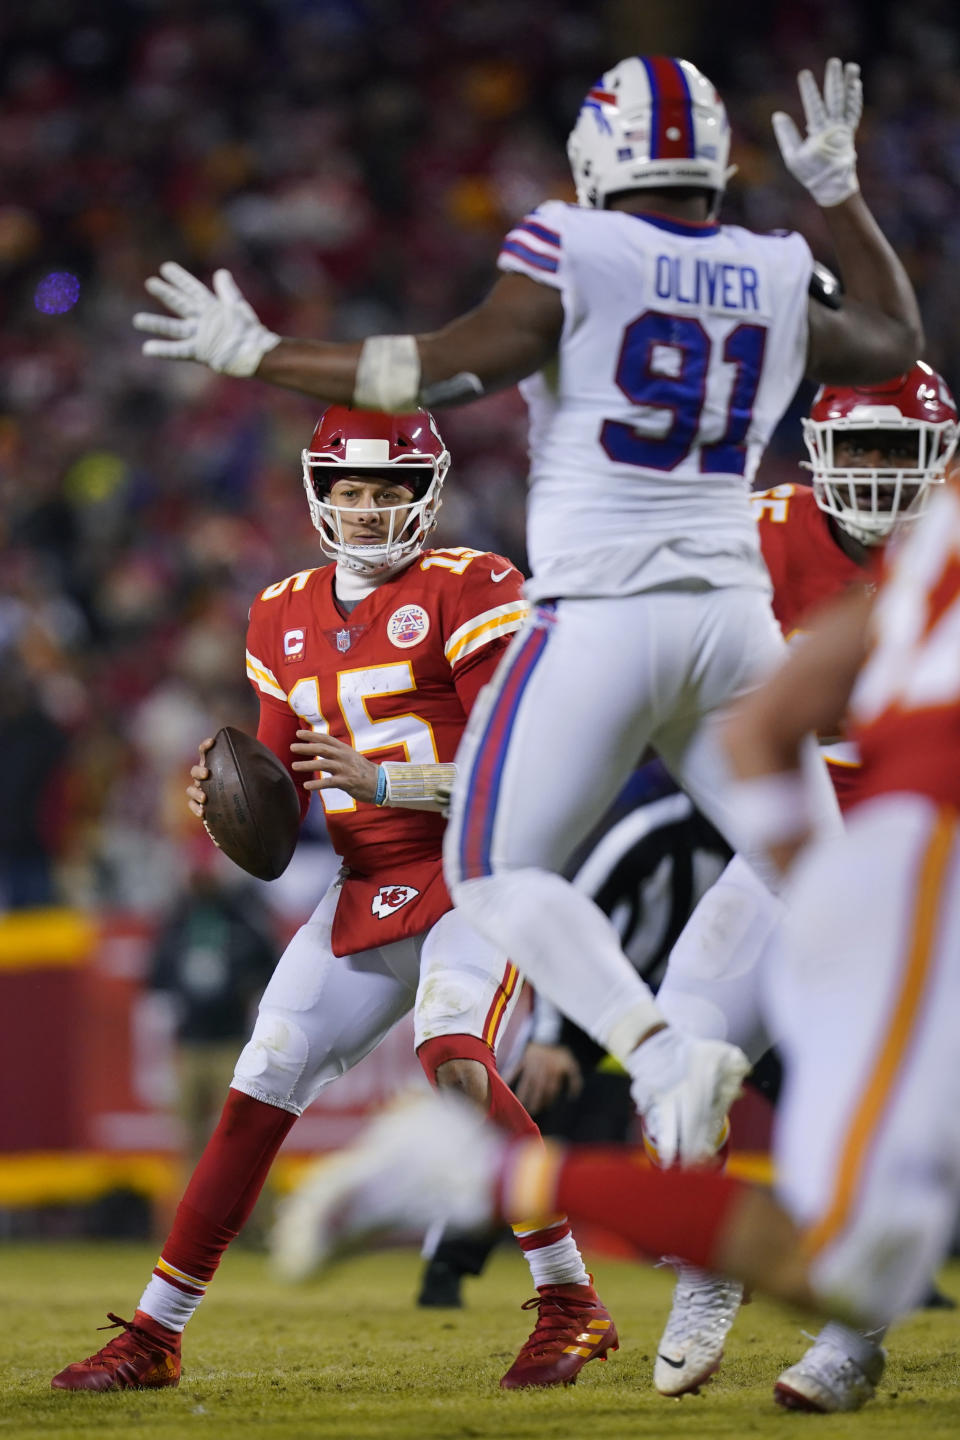 Kansas City Chiefs quarterback Patrick Mahomes (15) looks to pass around Buffalo Bills defensive tackle Ed Oliver (91) during the second half of an NFL divisional round playoff football game, Sunday, Jan. 23, 2022, in Kansas City, Mo. (AP Photo/Ed Zurga)